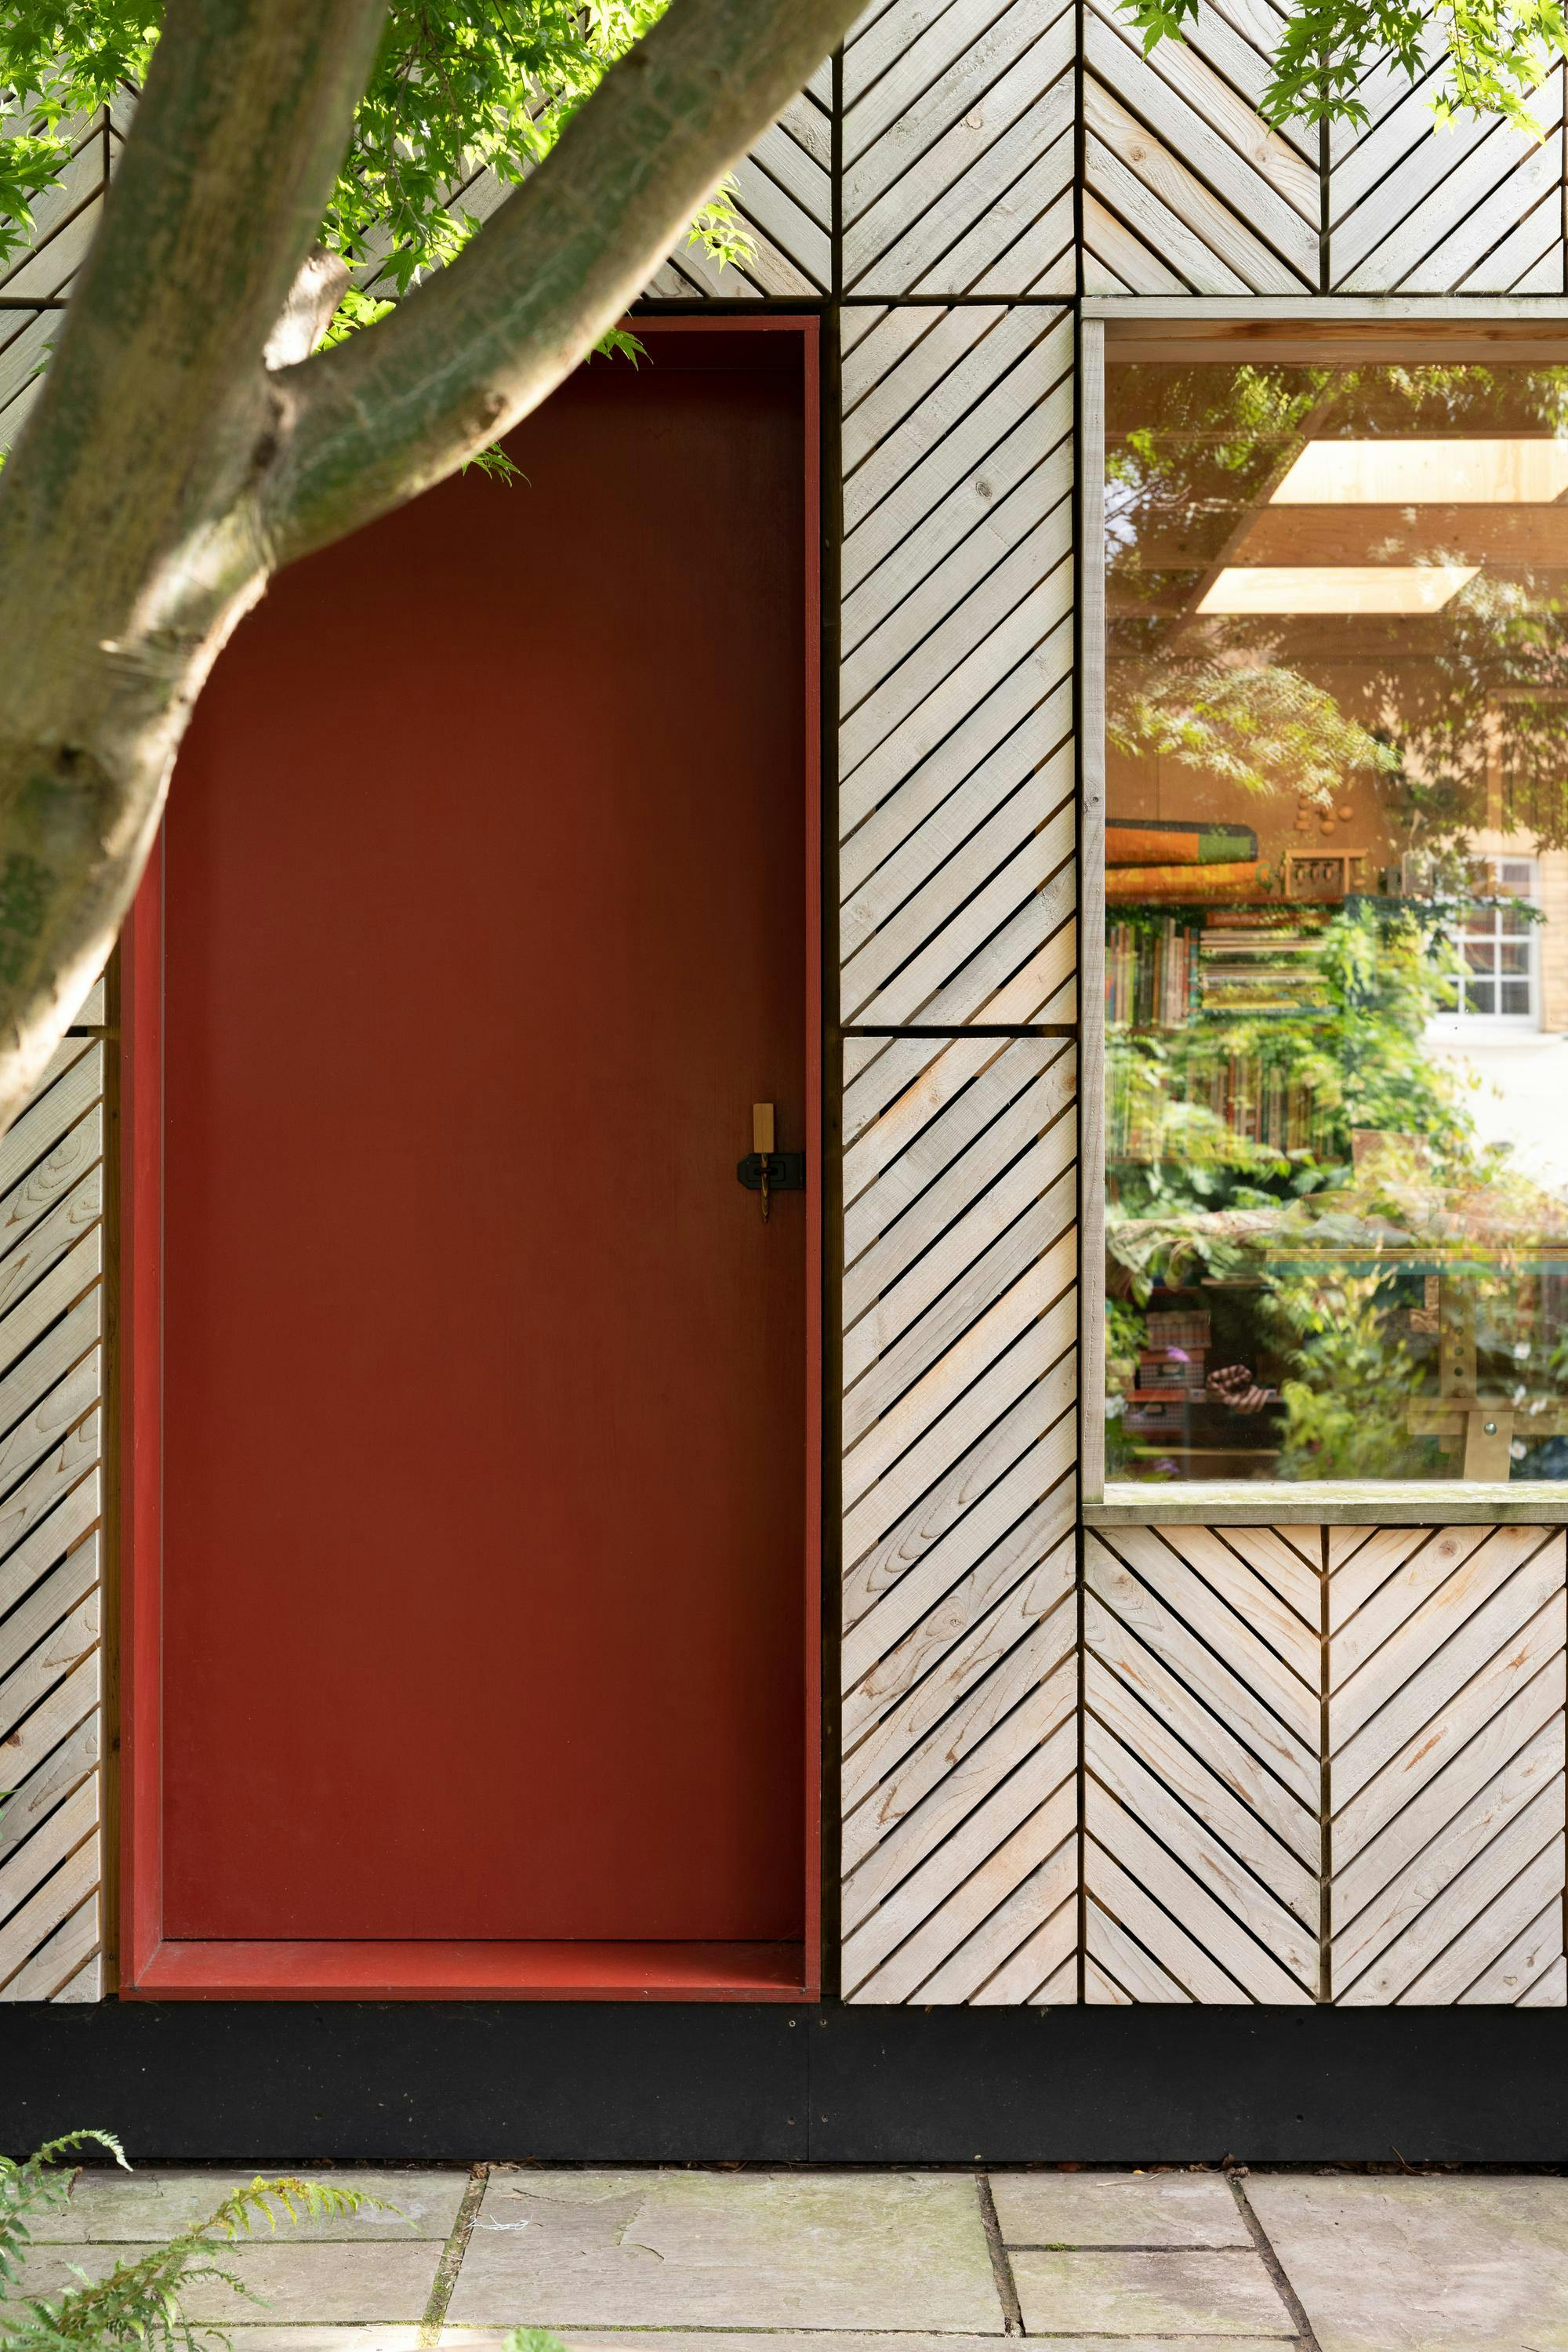 Image of garden shed made from timber with a red front door